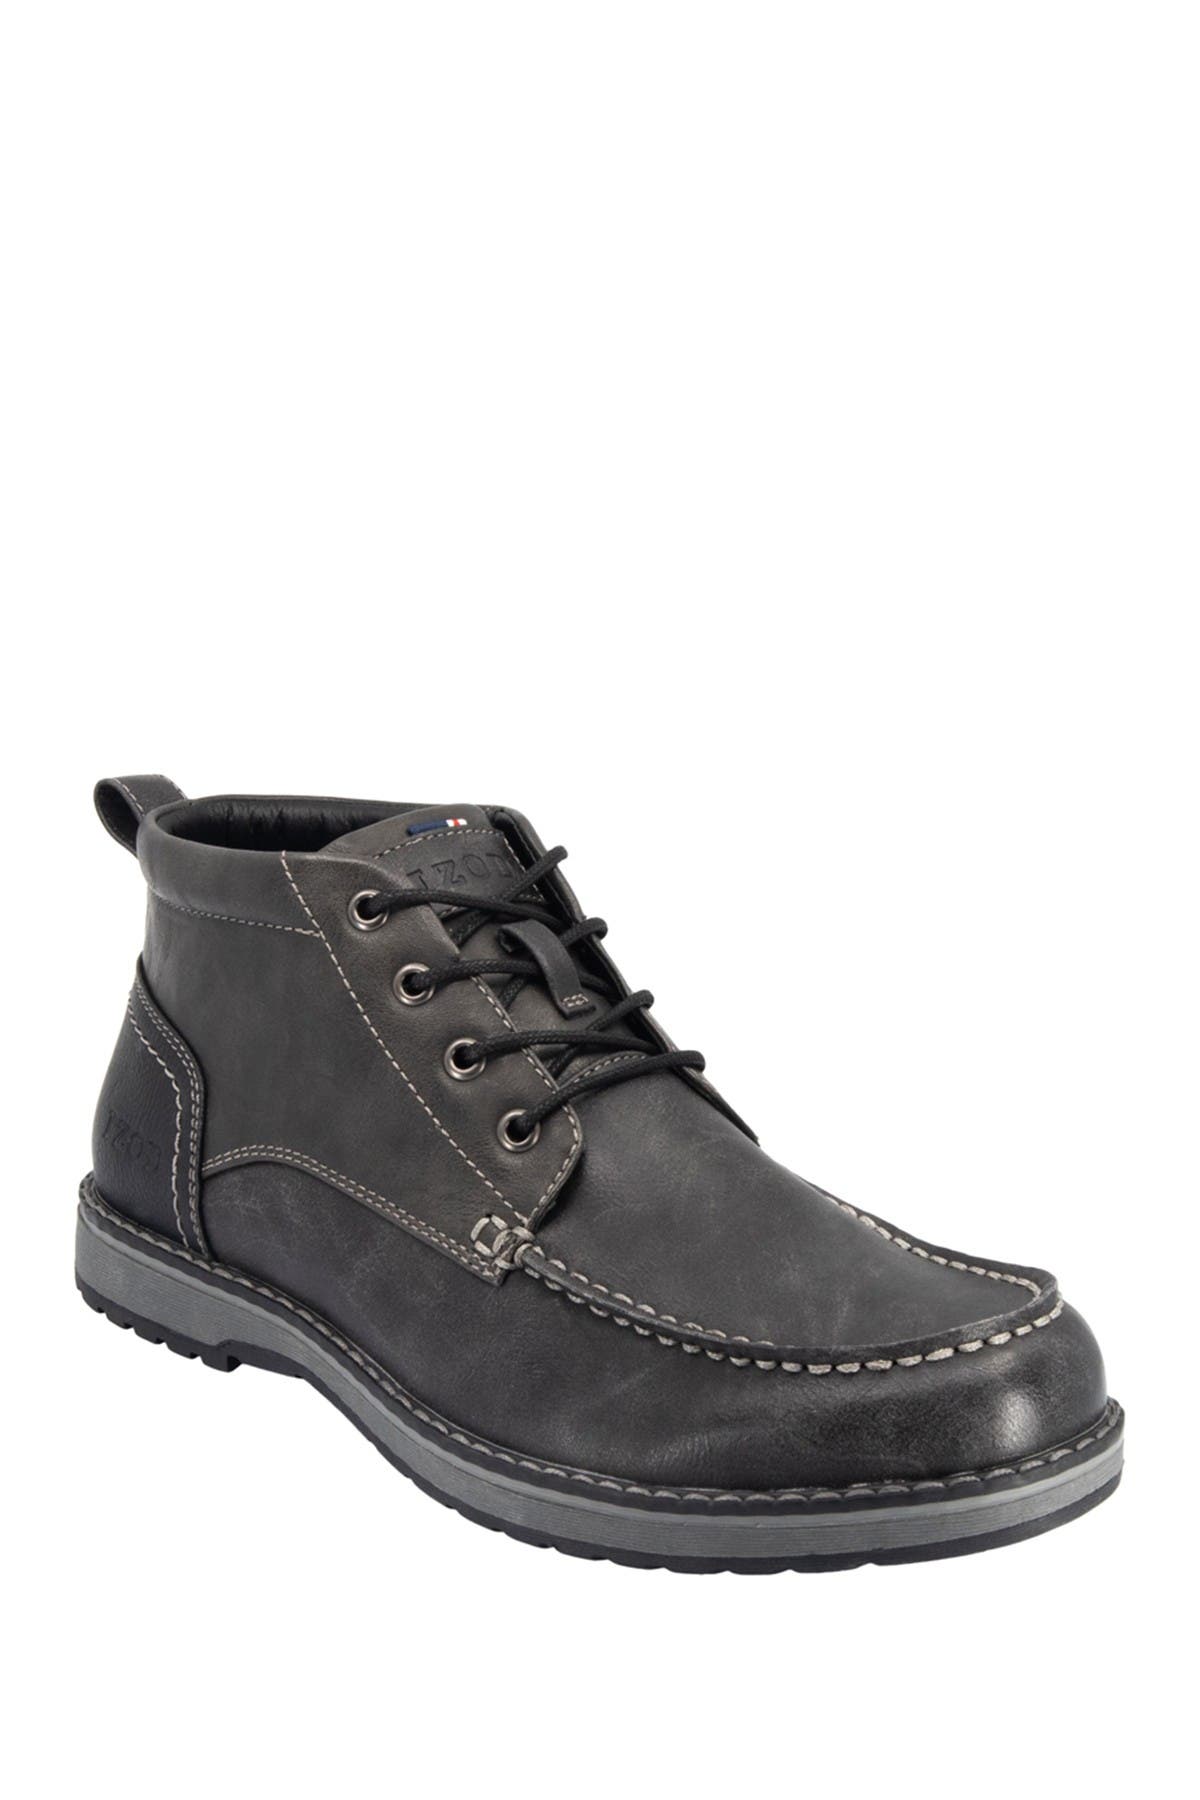 Izod Landry Casual Boot In Charcoal | ModeSens